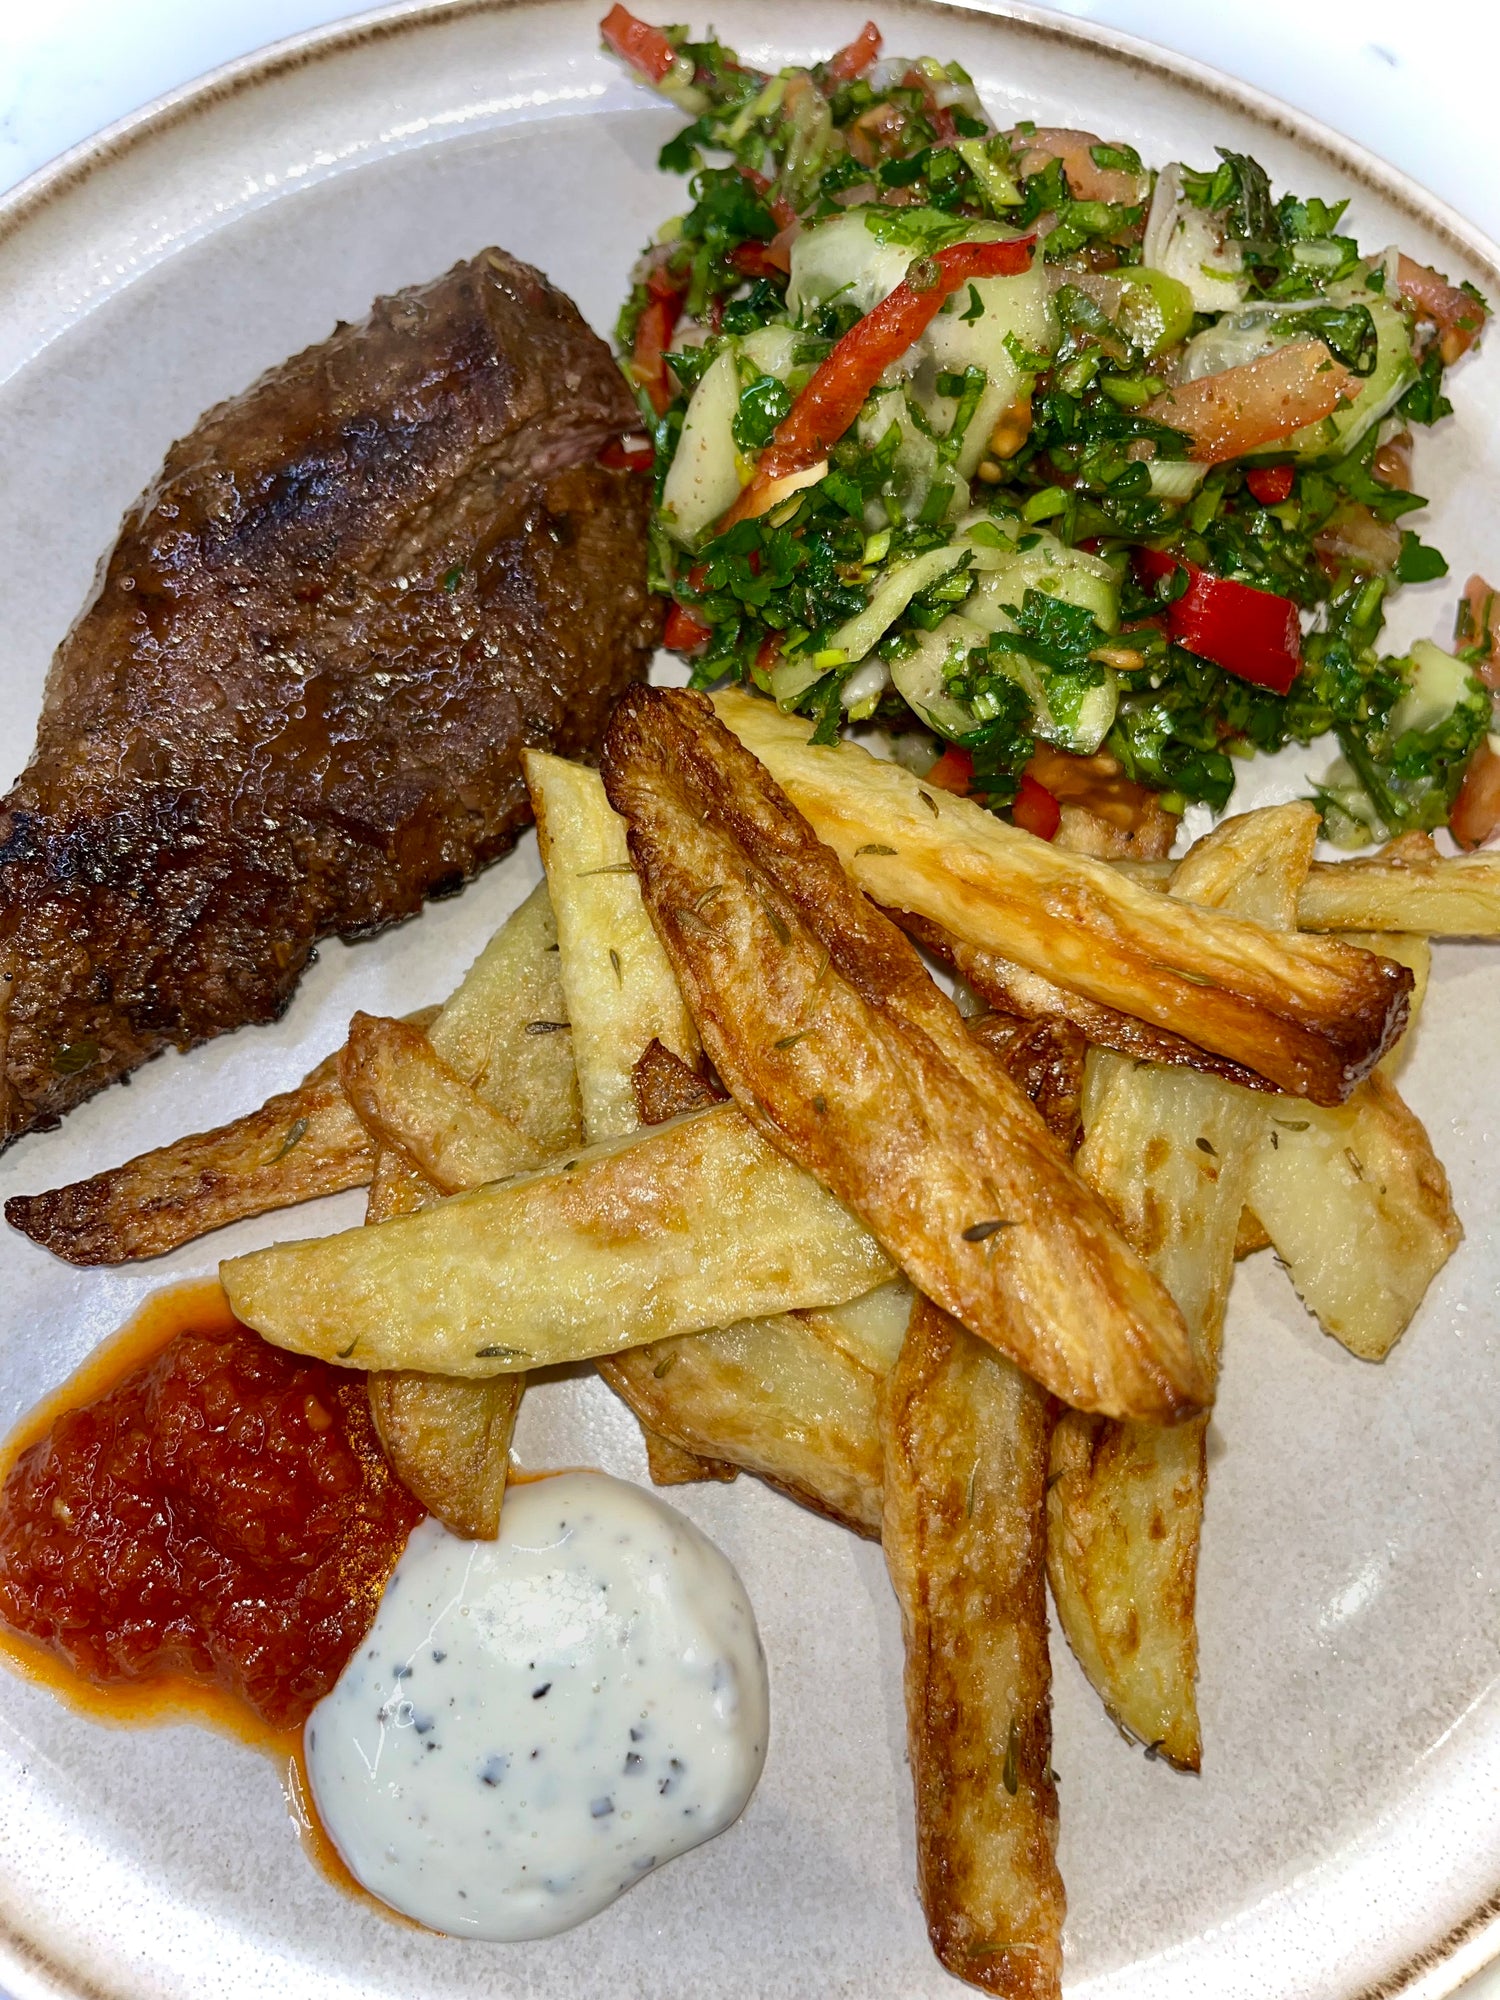 Lamb Steaks with Chips and Salad